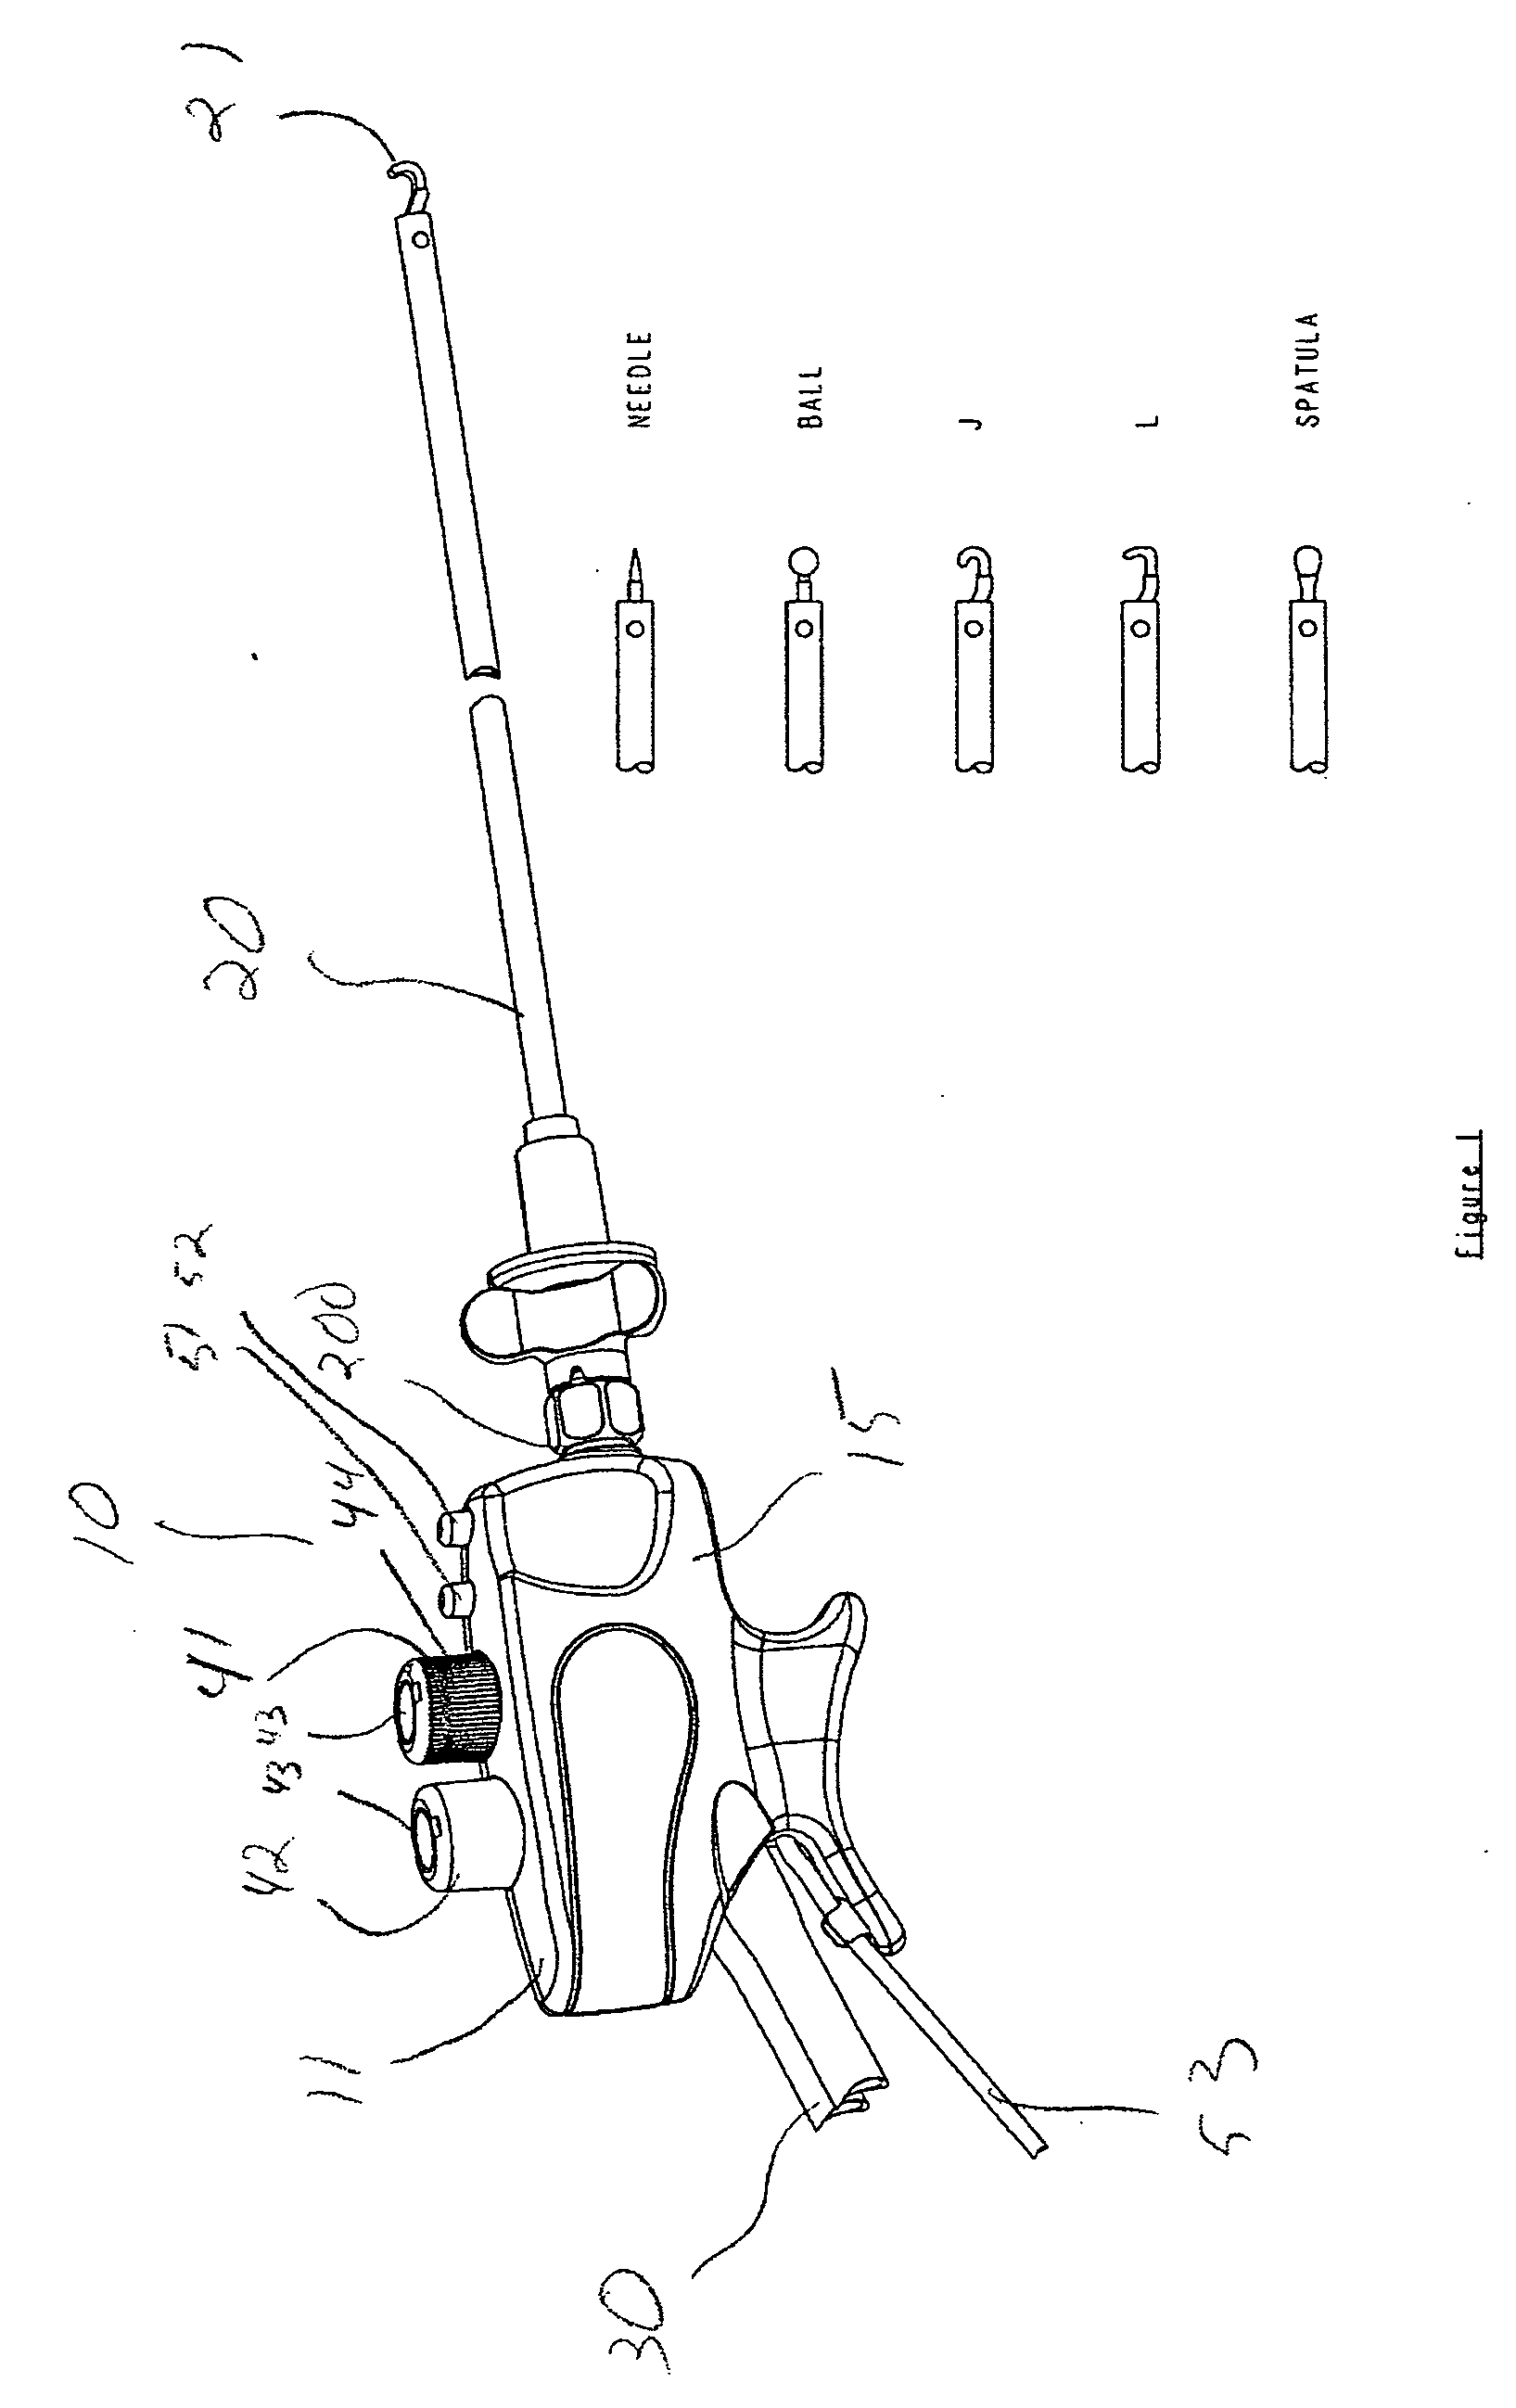 Medical suction and irrigation device